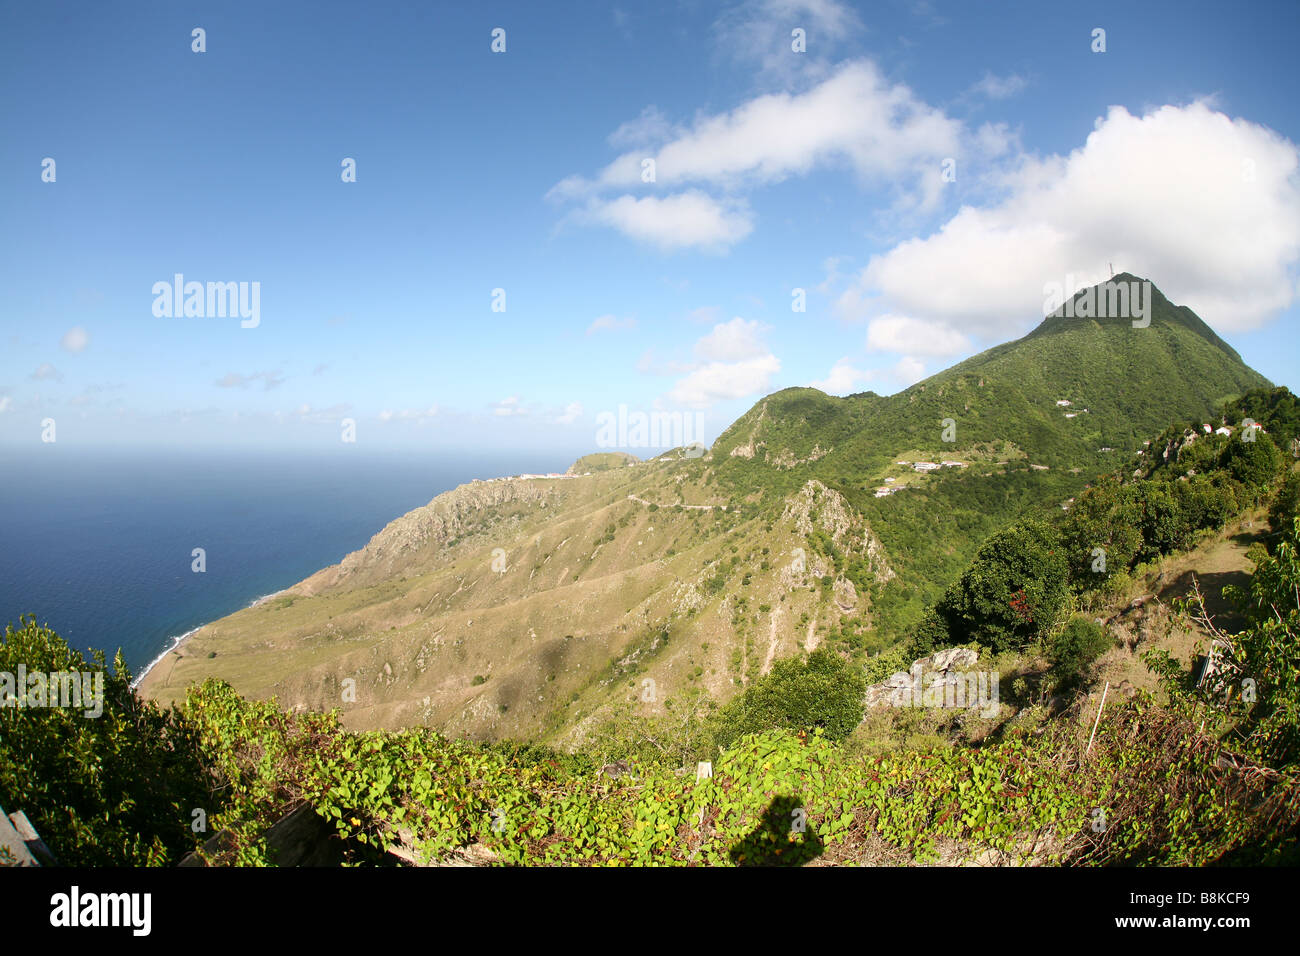 View Over The Volcano Mount Scenery On The Caribbean Isle Saba In The Stock Photo Alamy